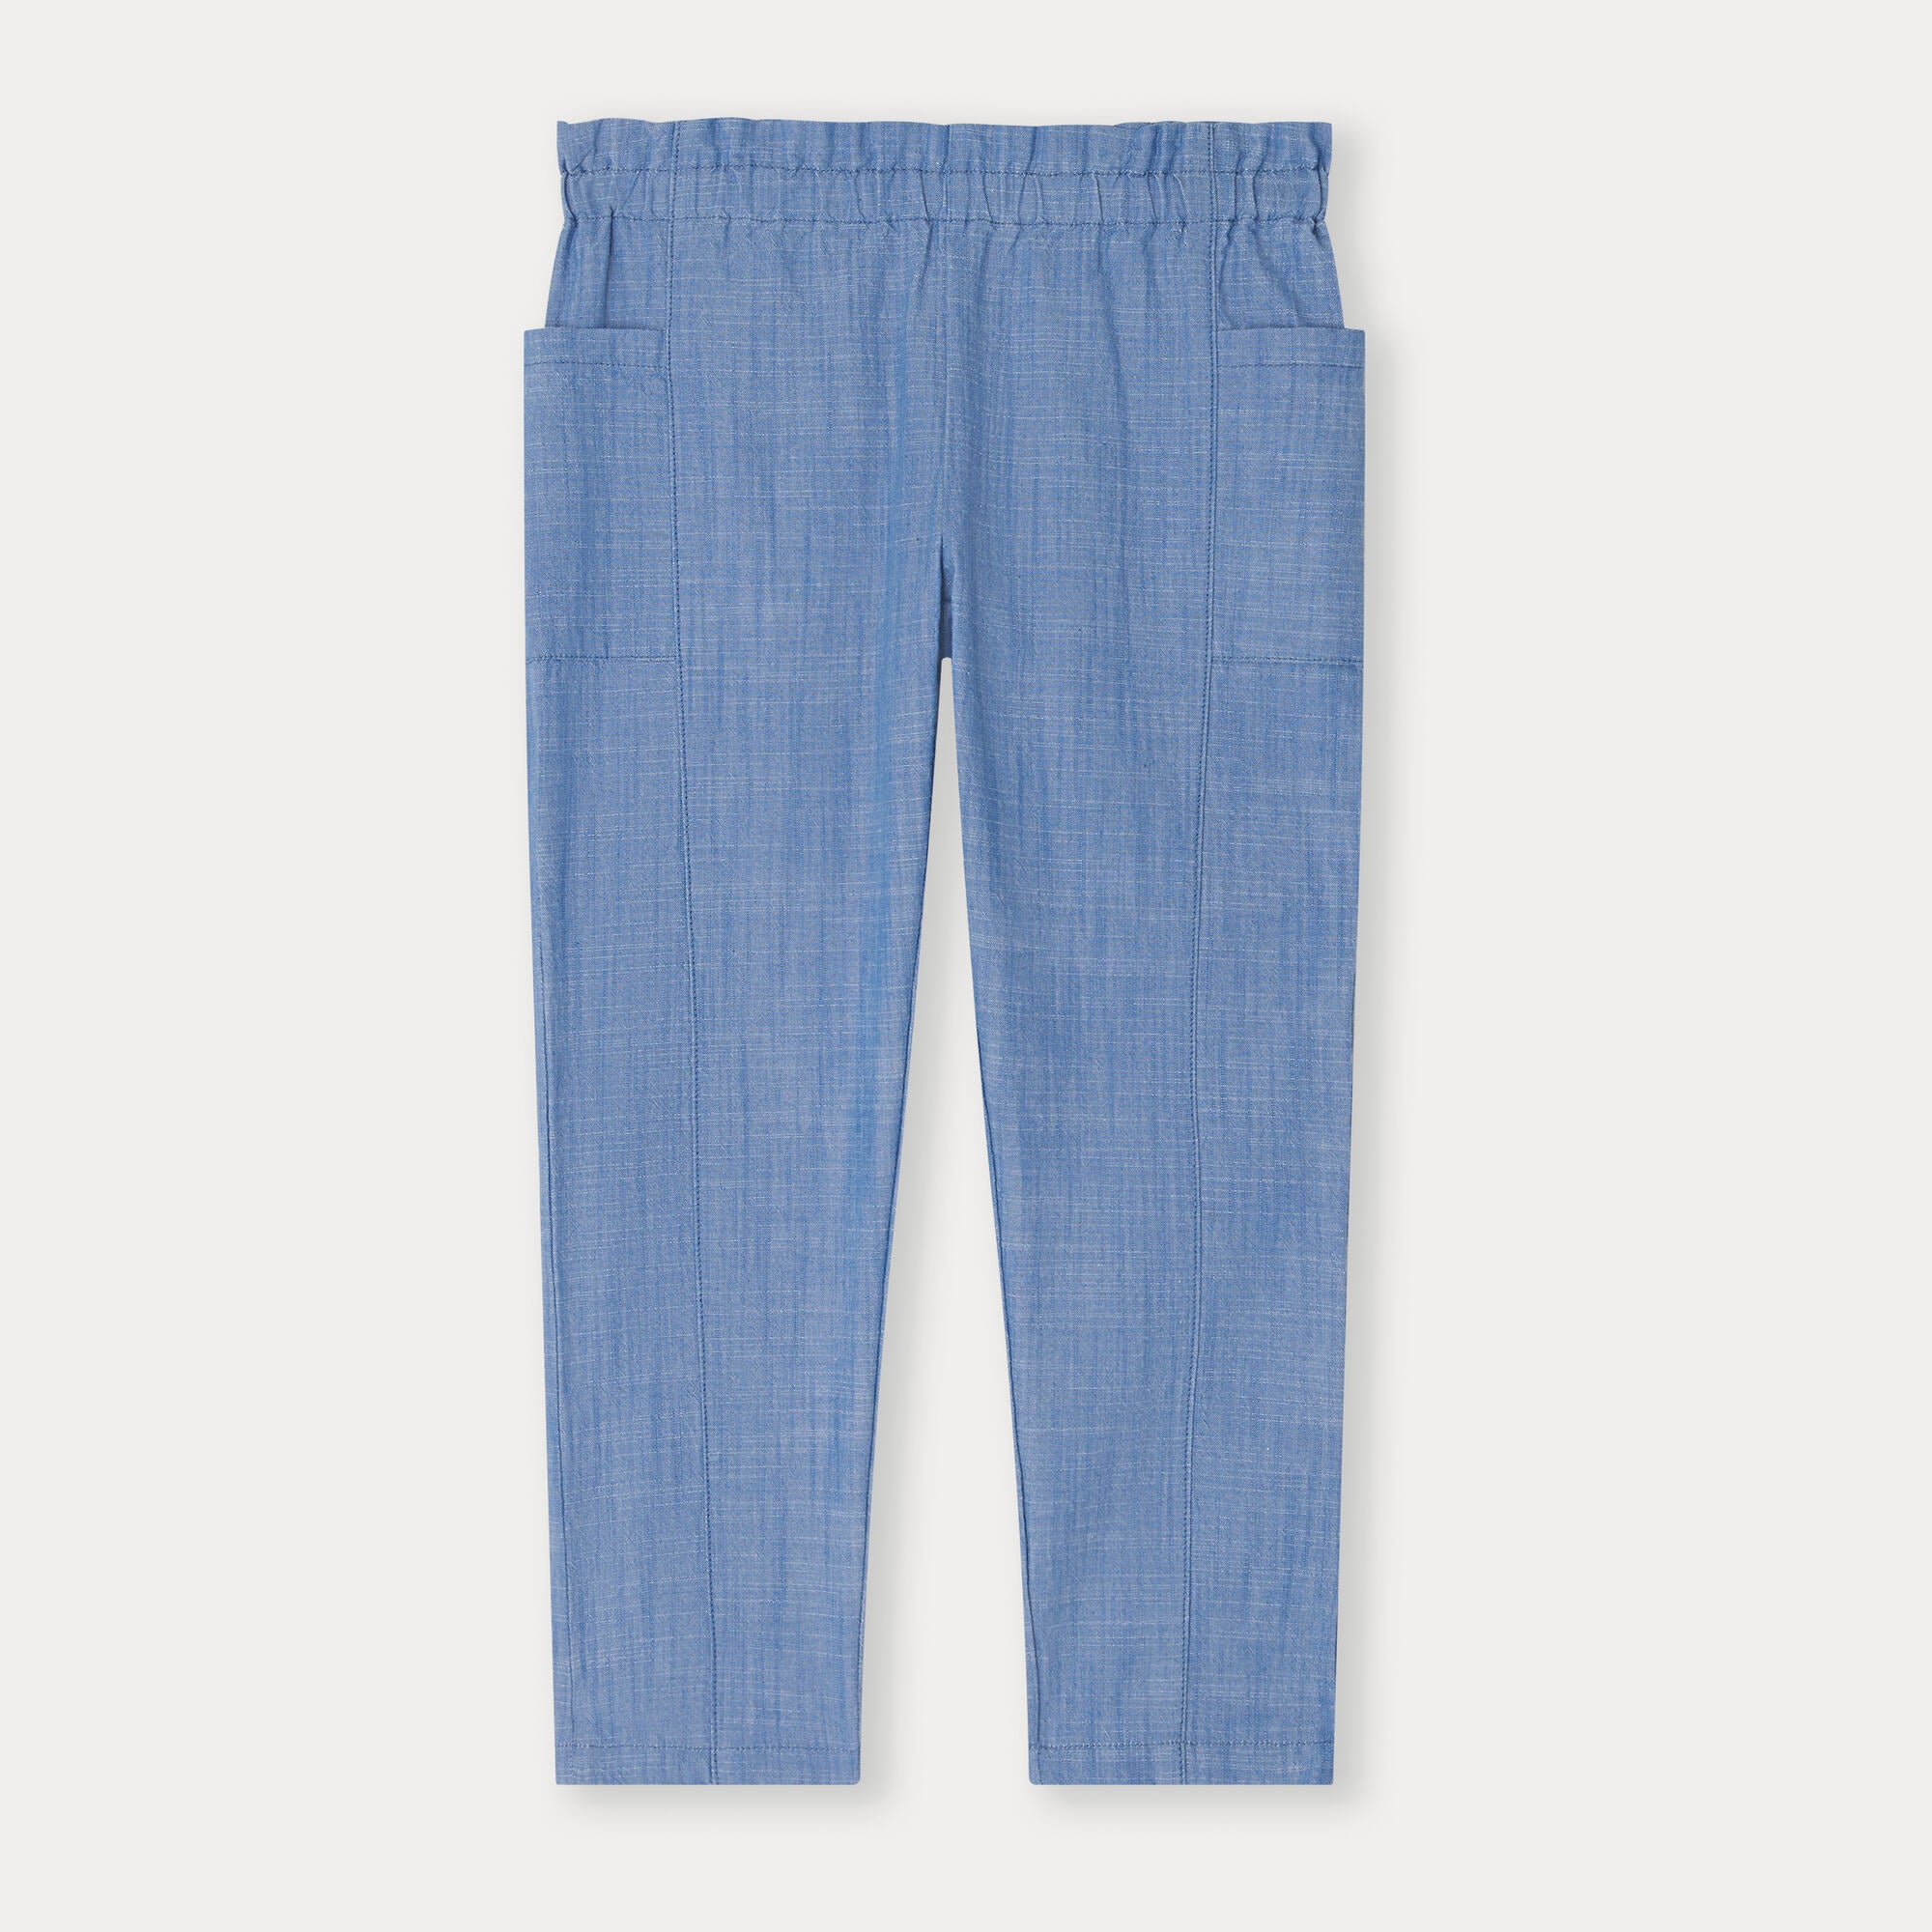 Girls Blue Cotton Trousers